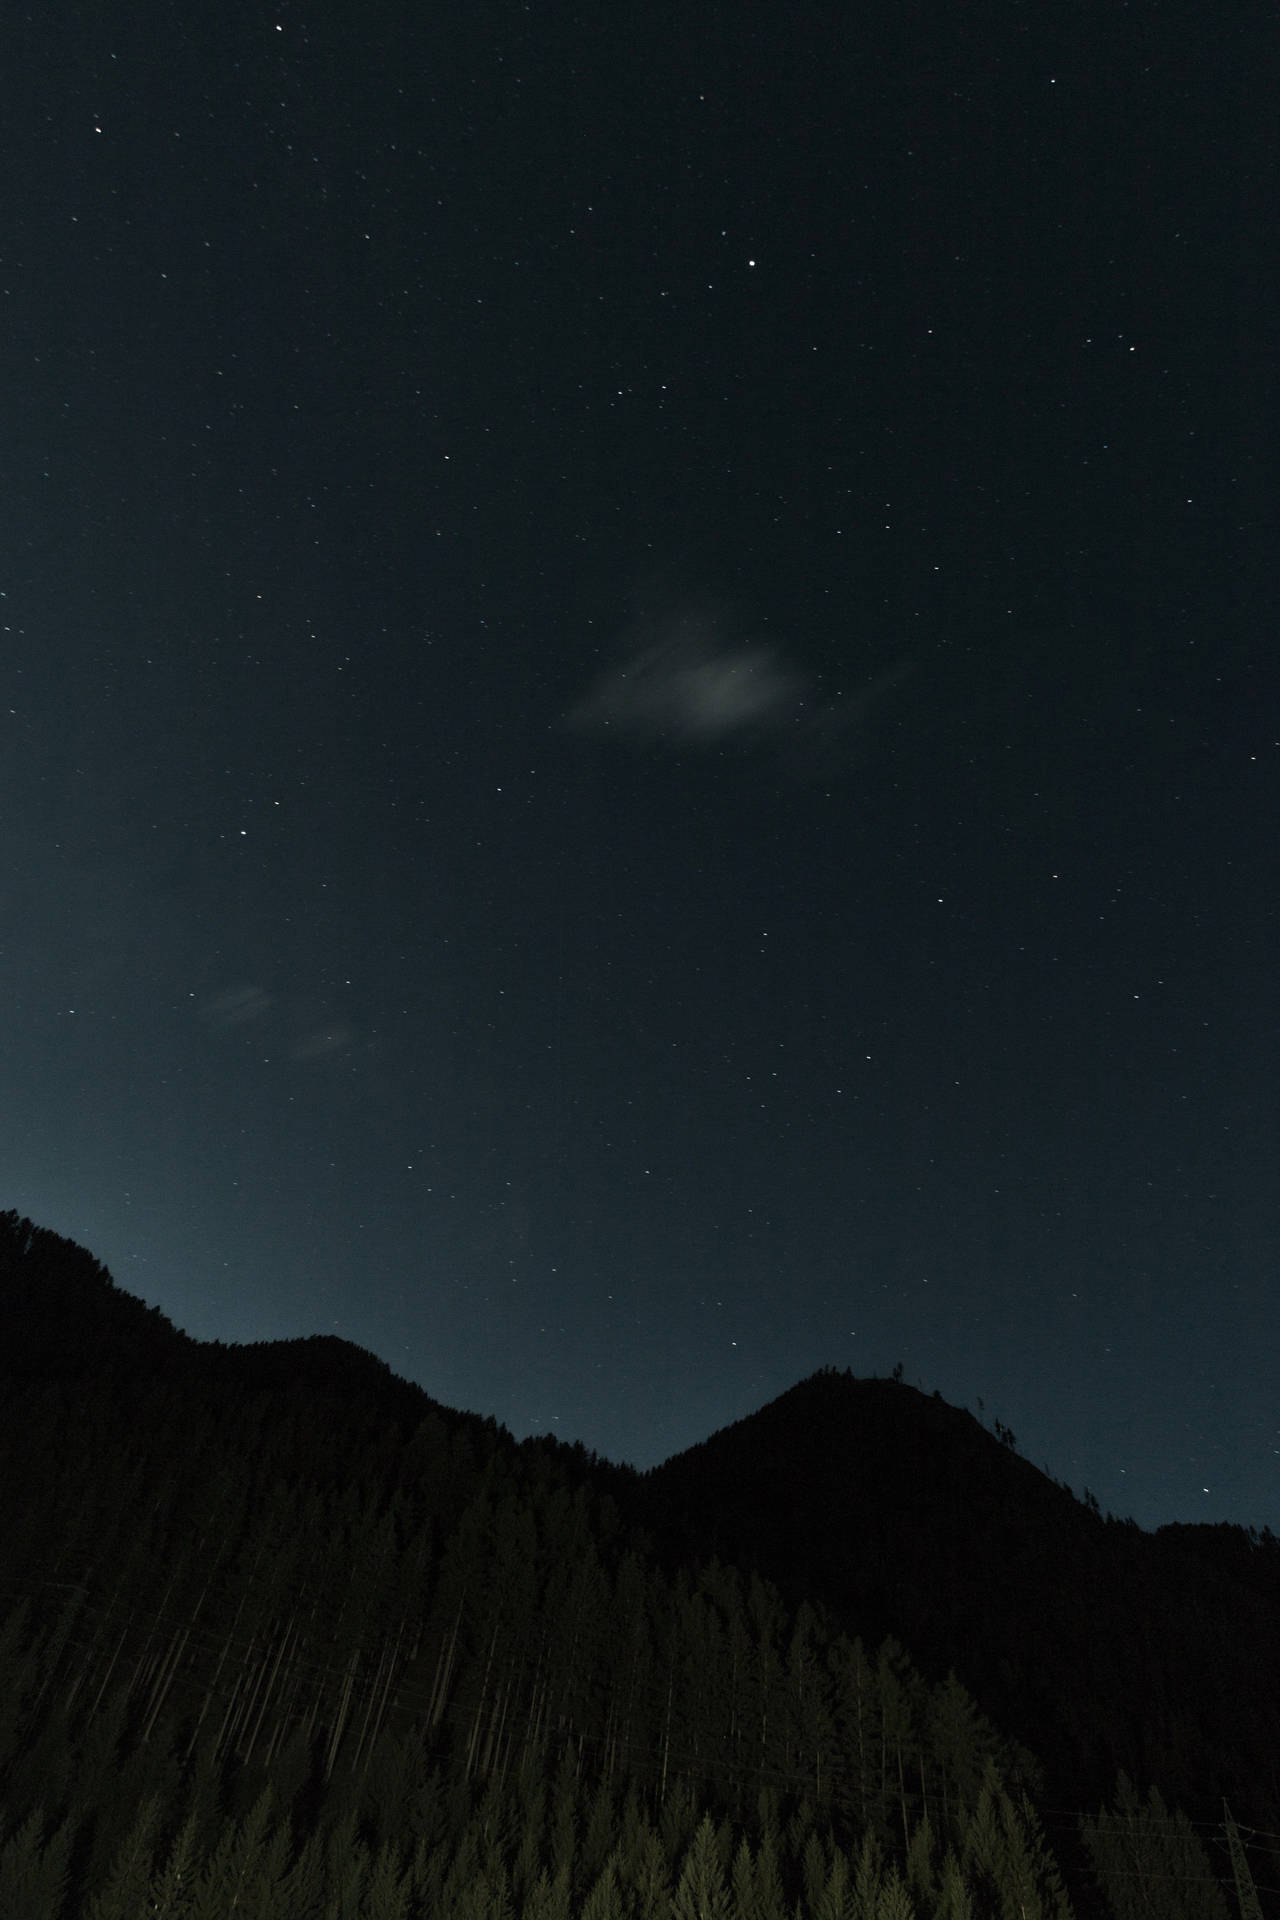 A dimly lit, star-filled sky above a stunning mountain silhouette. Wallpaper